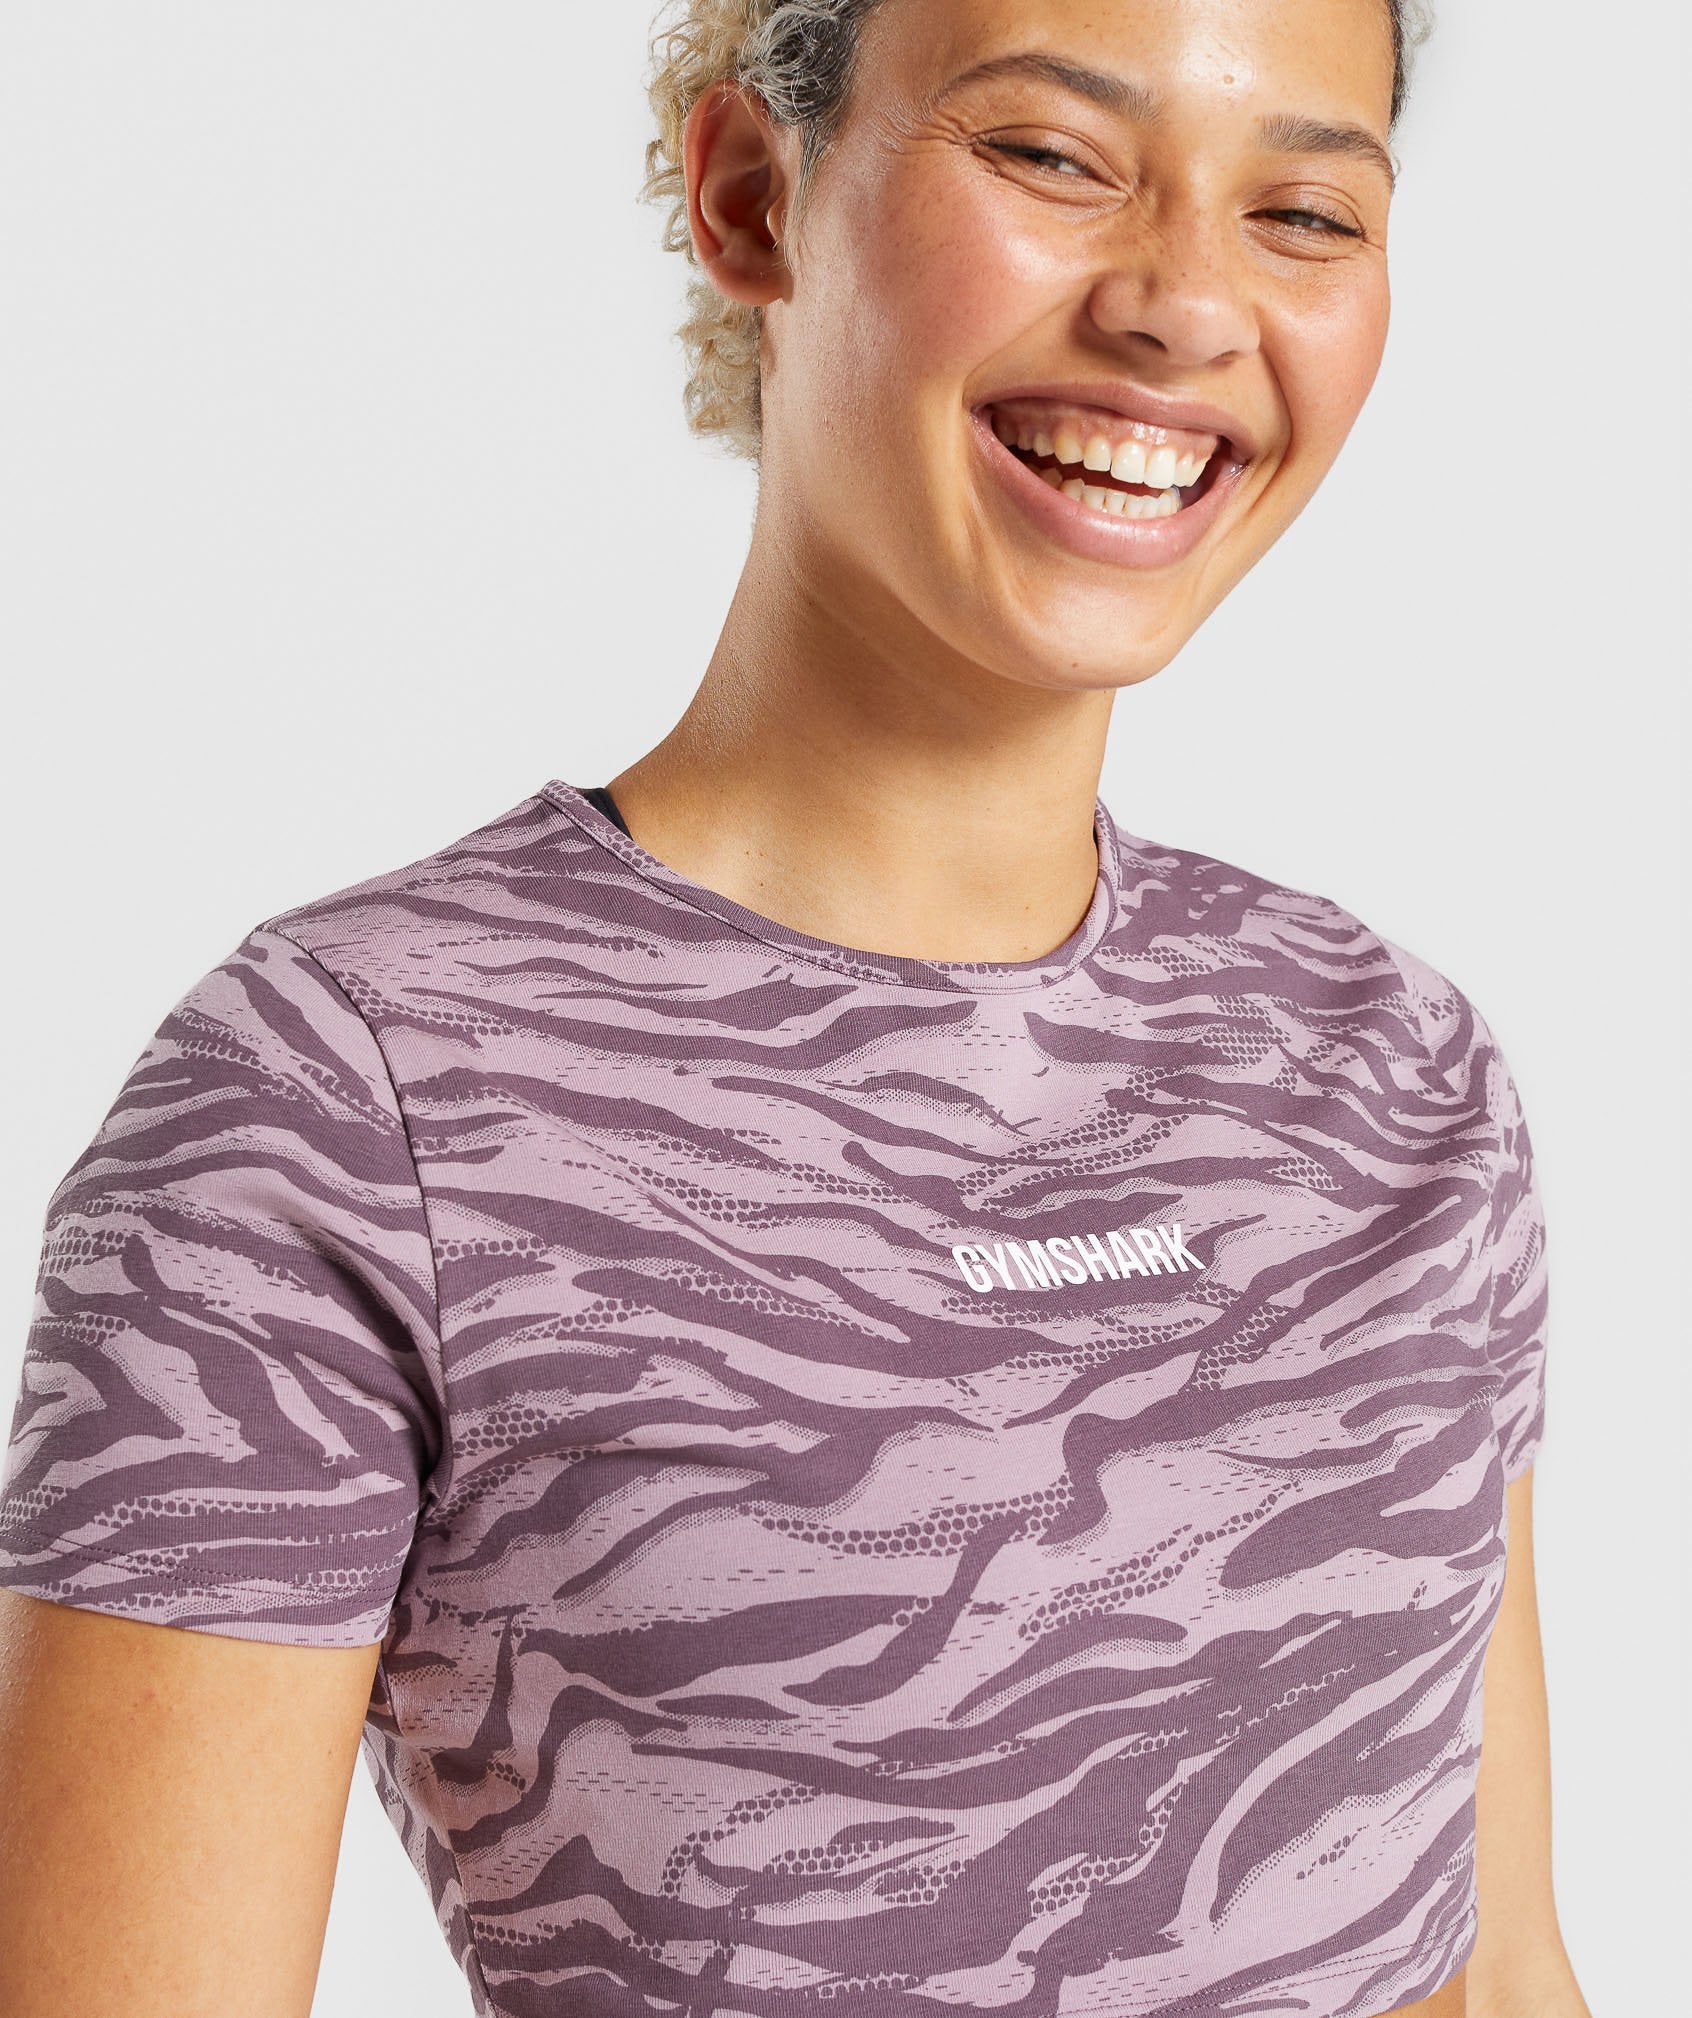 Animal Graphic Crop Top in Purple Print - view 7